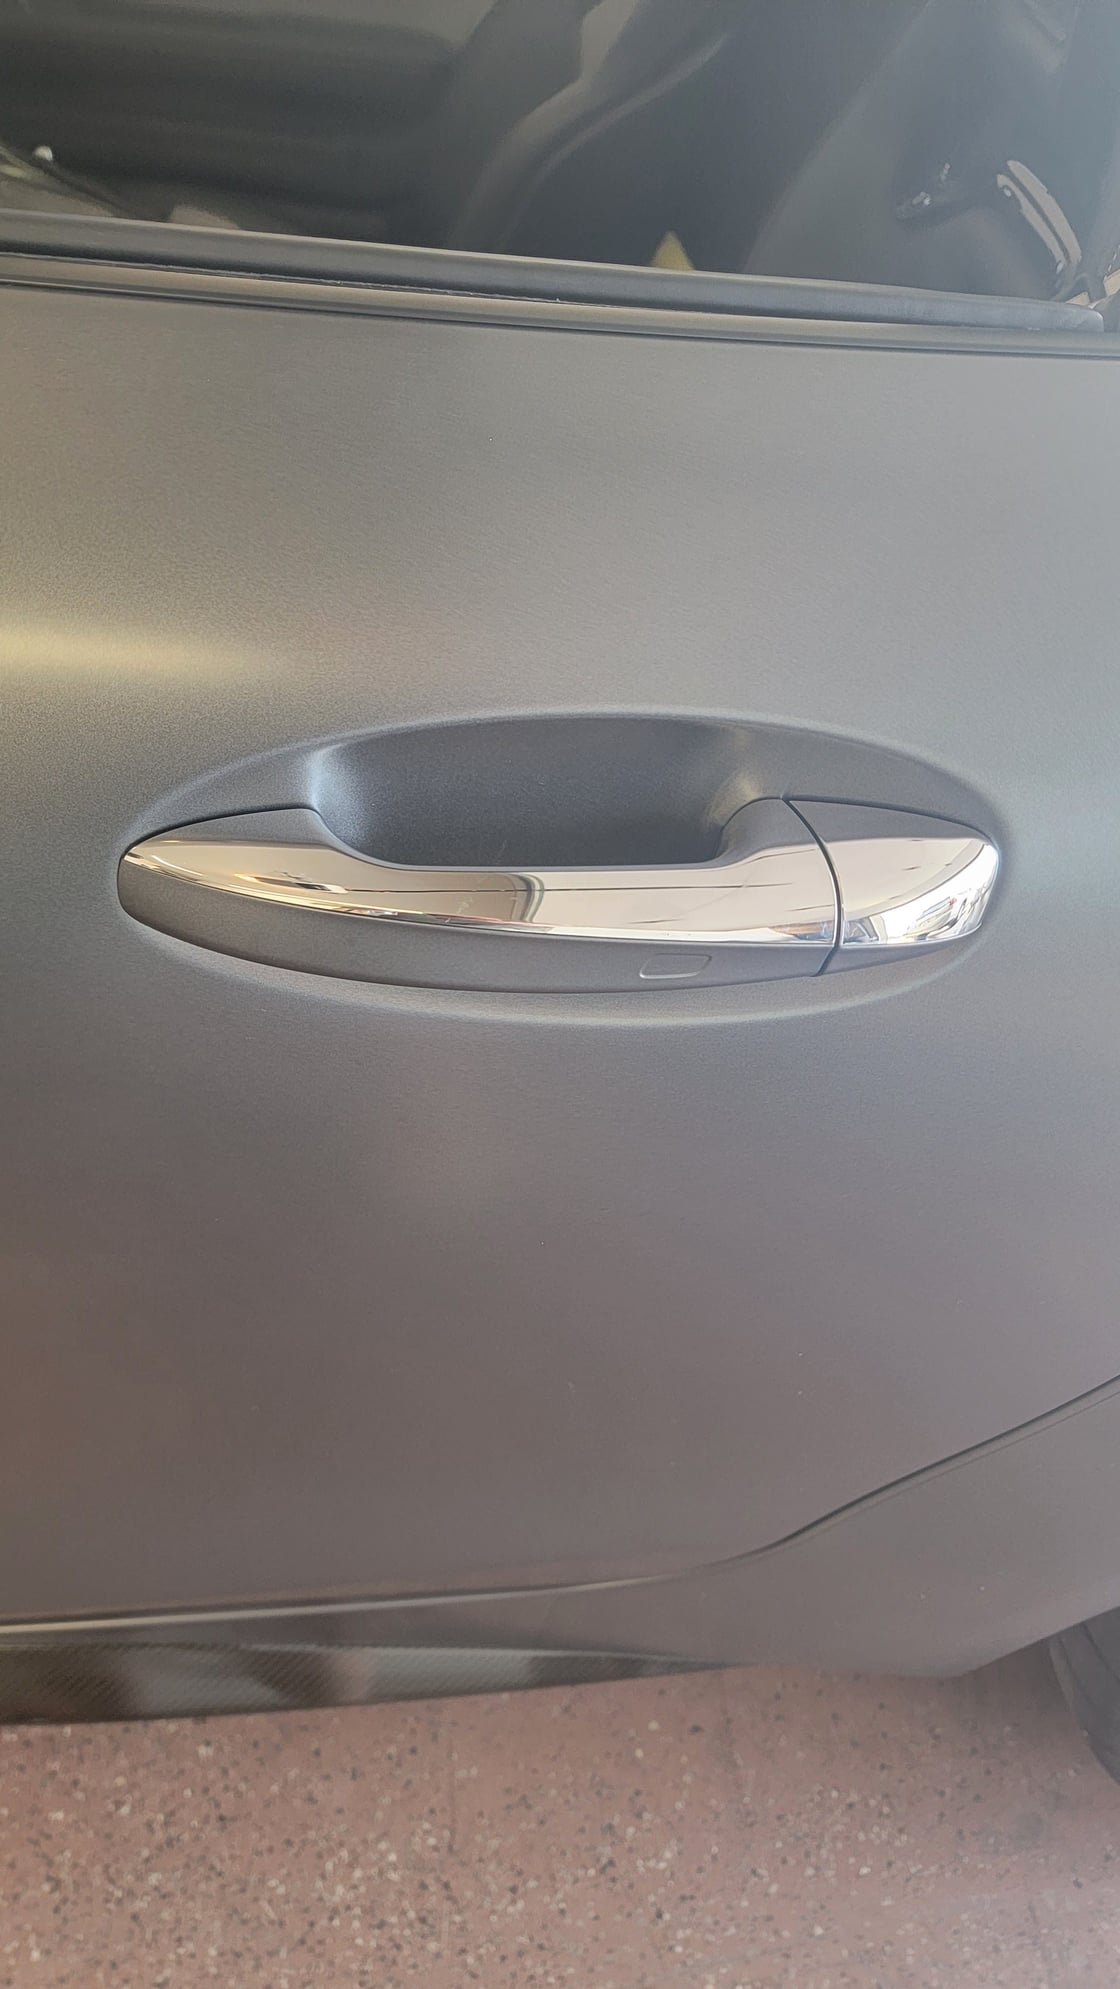 Door Handle and Center Console Customization - MBWorld.org Forums